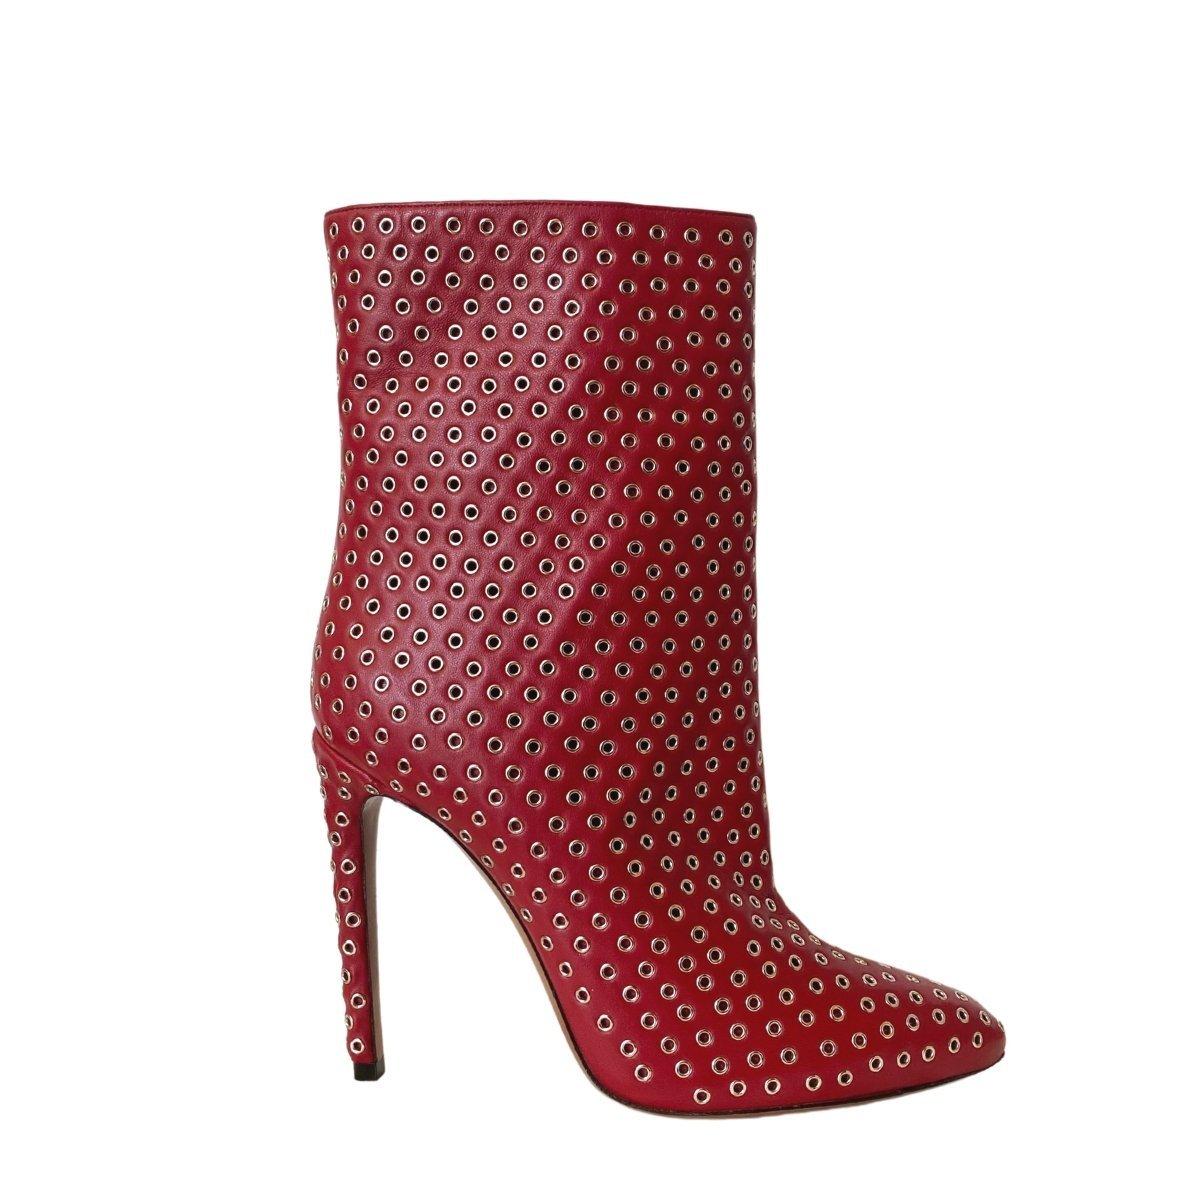 Alaia Studded Leather Ankle Boots size 38 For Sale 1